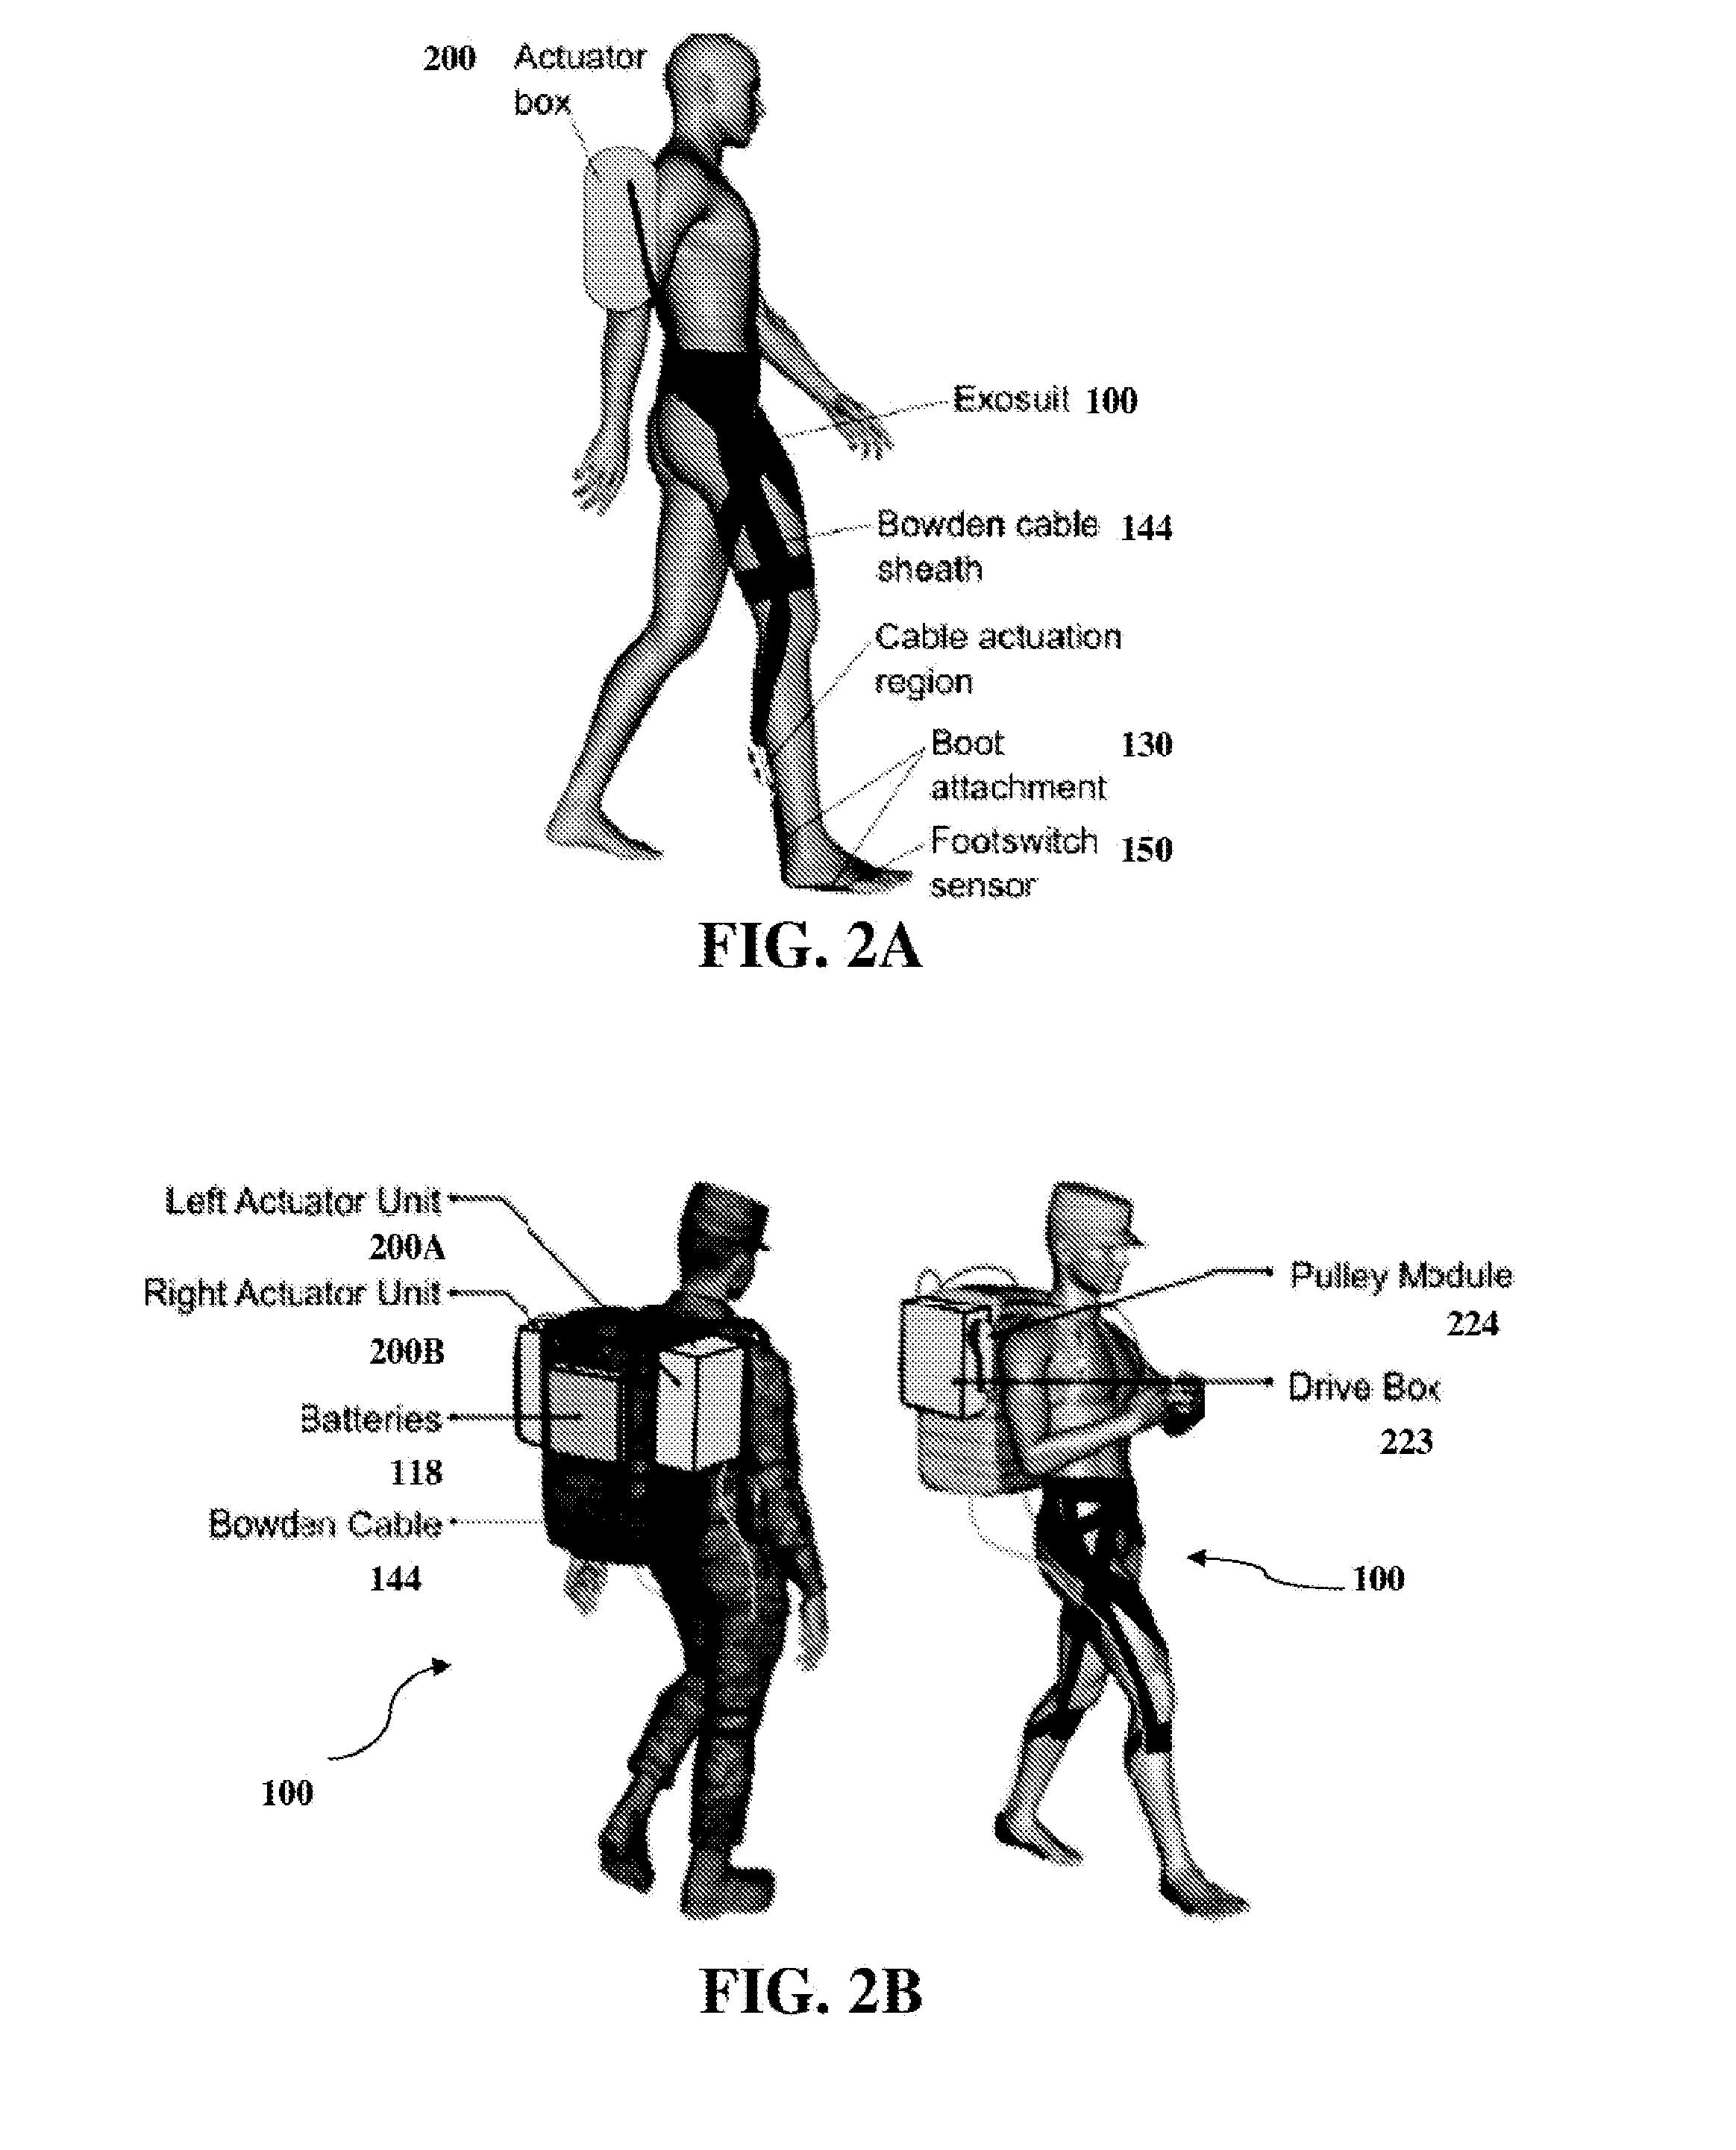 Soft Exosuit for Assistance with Human Motion